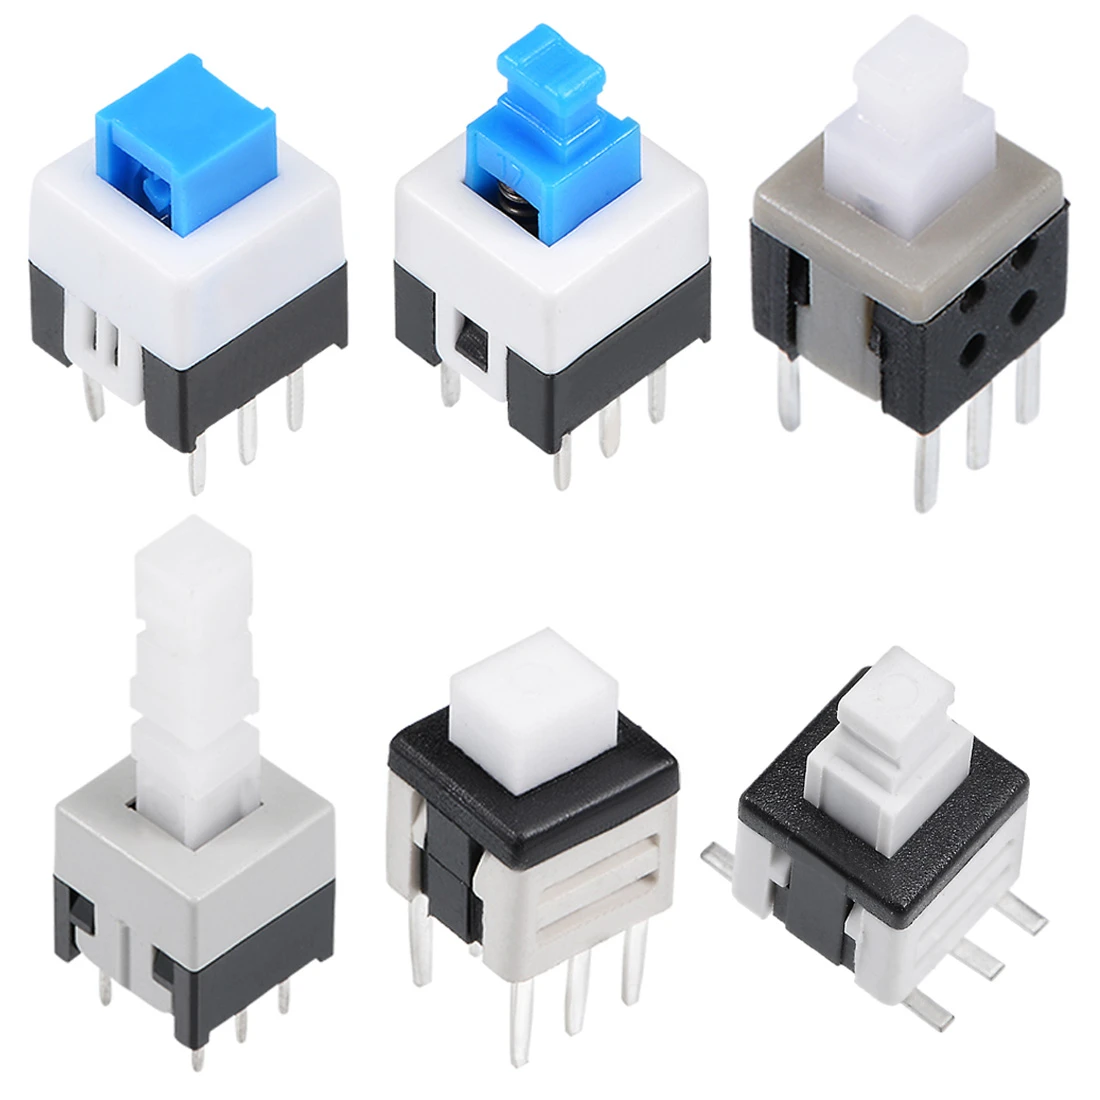 Ltd / Uxcell a12062600ux0305 Uxcell Latching Contact 6 Pin Tactile Push Button Switches Dragonmarts Co 